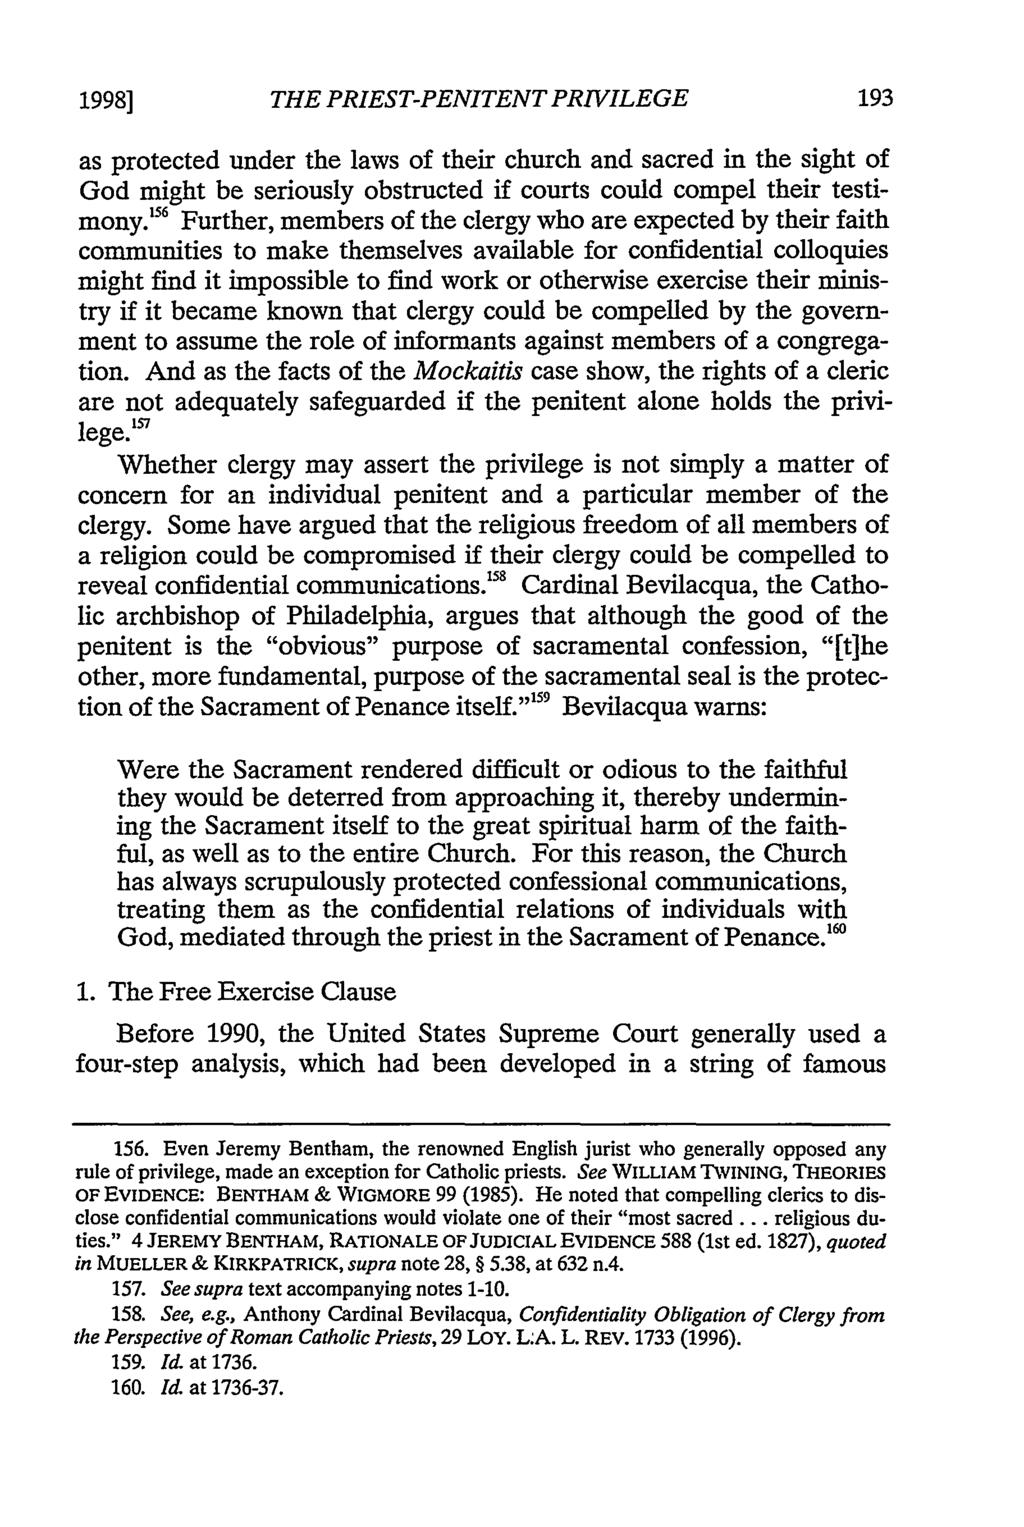 1998] THE PRIEST-PENITENT PRIVILEGE as protected under the laws of their church and sacred in the sight of God might be seriously obstructed if courts could compel their testimony.